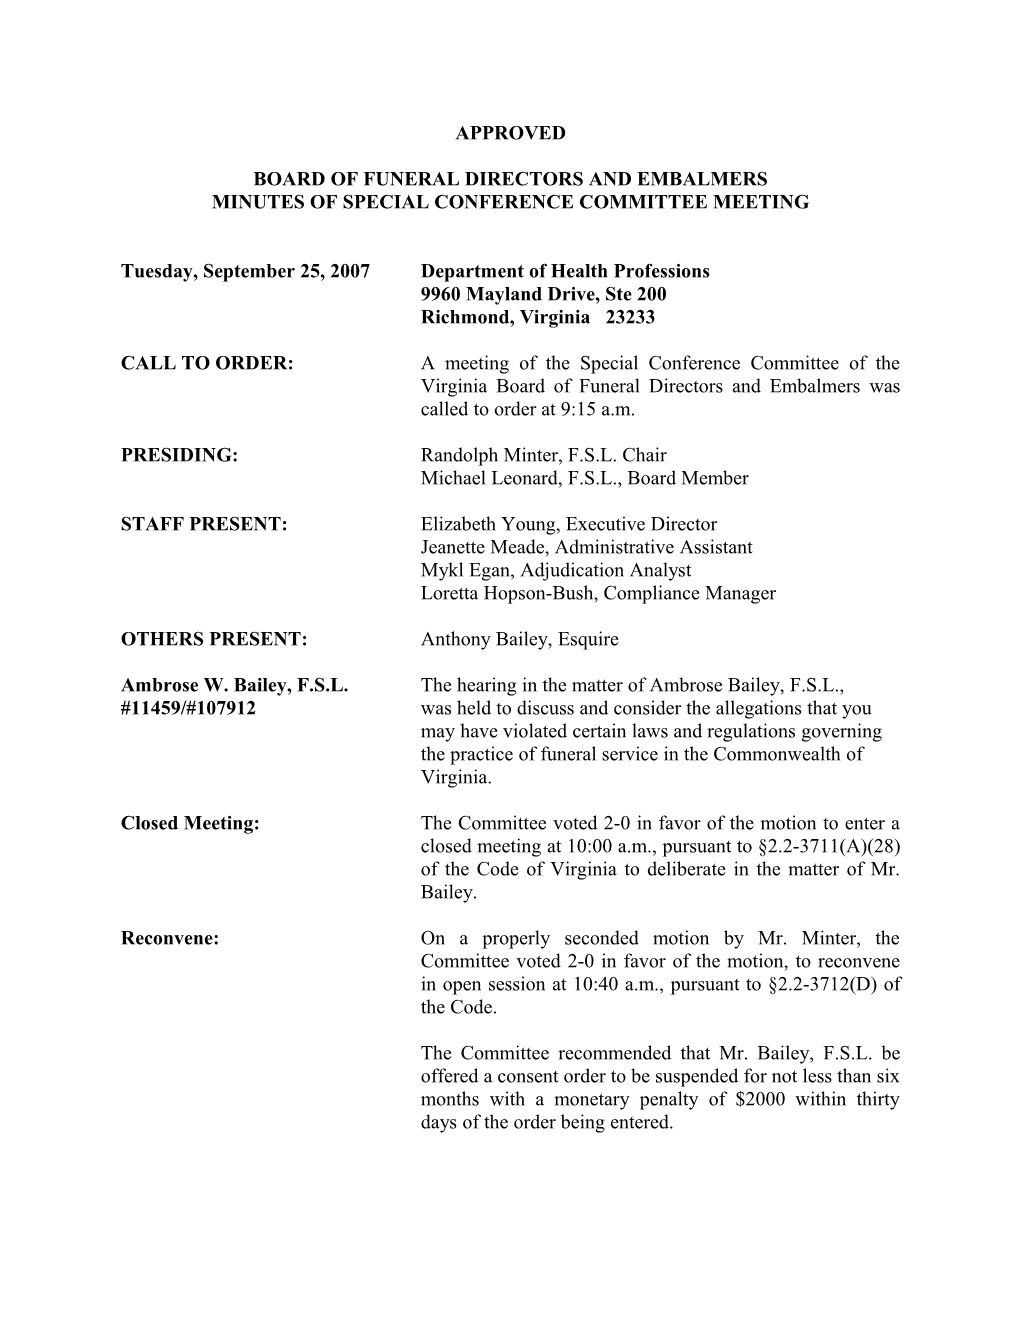 Funeral - Approved Minutes of September 25, 2007 Special Conference Committee Meeting